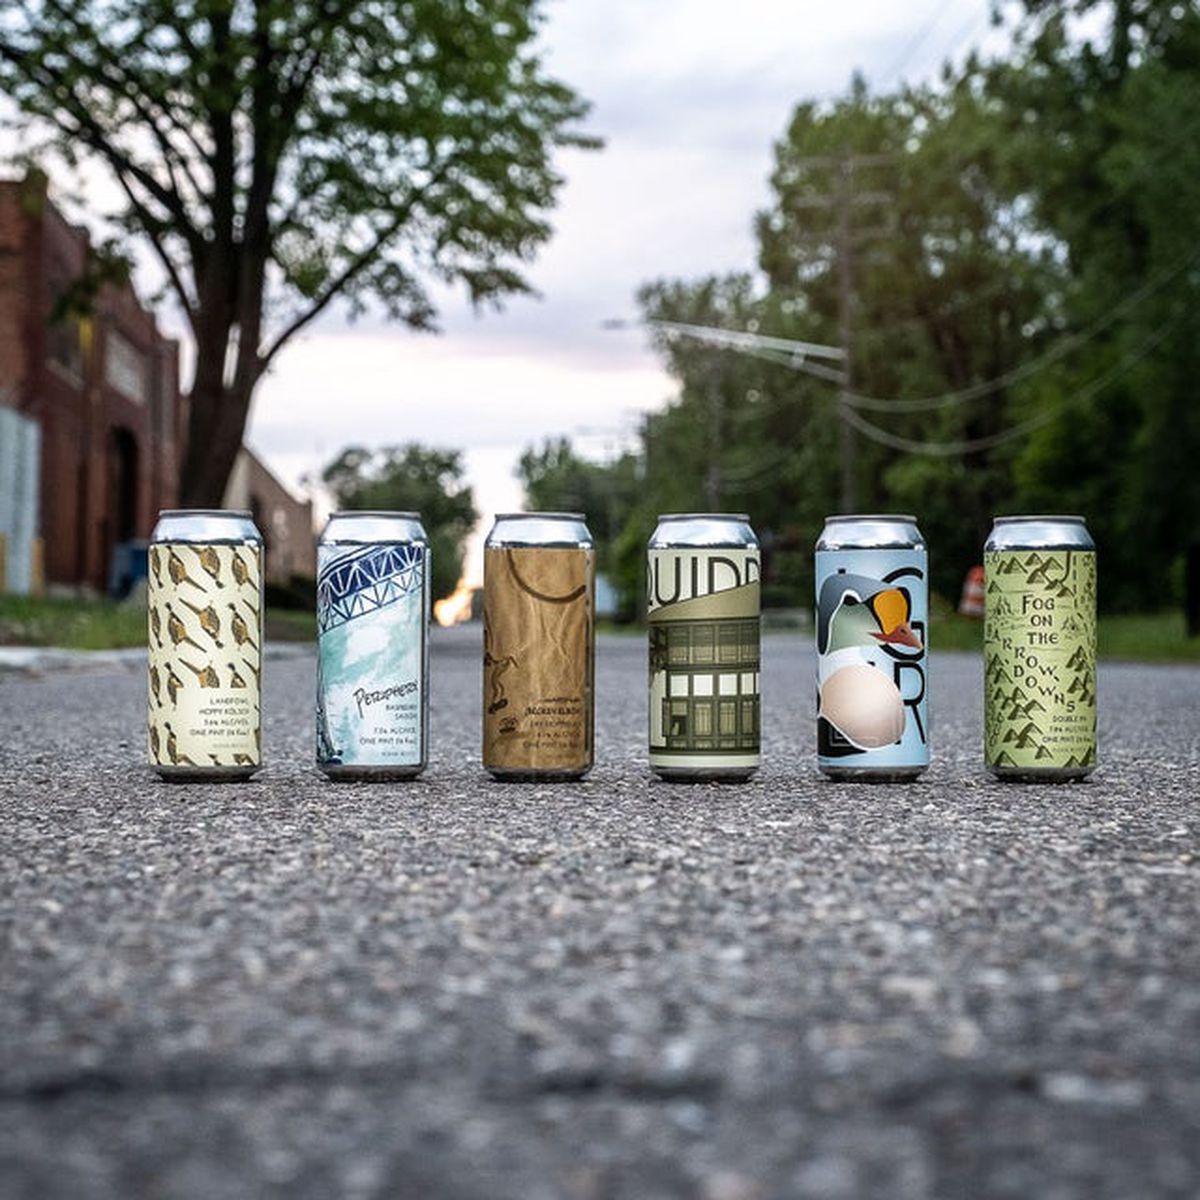 A row of different cans from Brewery Faisan in the middle of the street. 